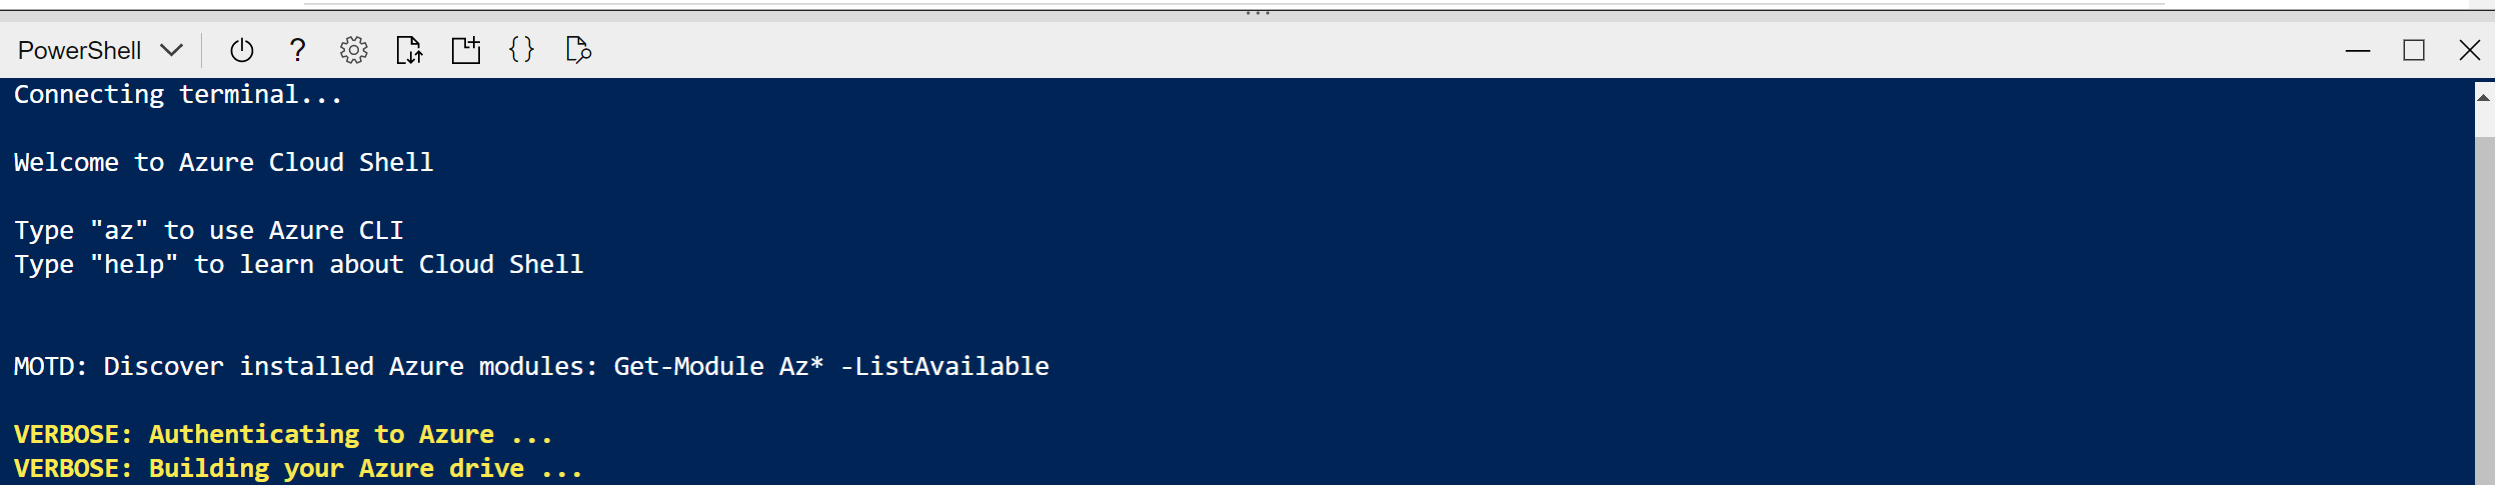 Wait for PowerShell to start.